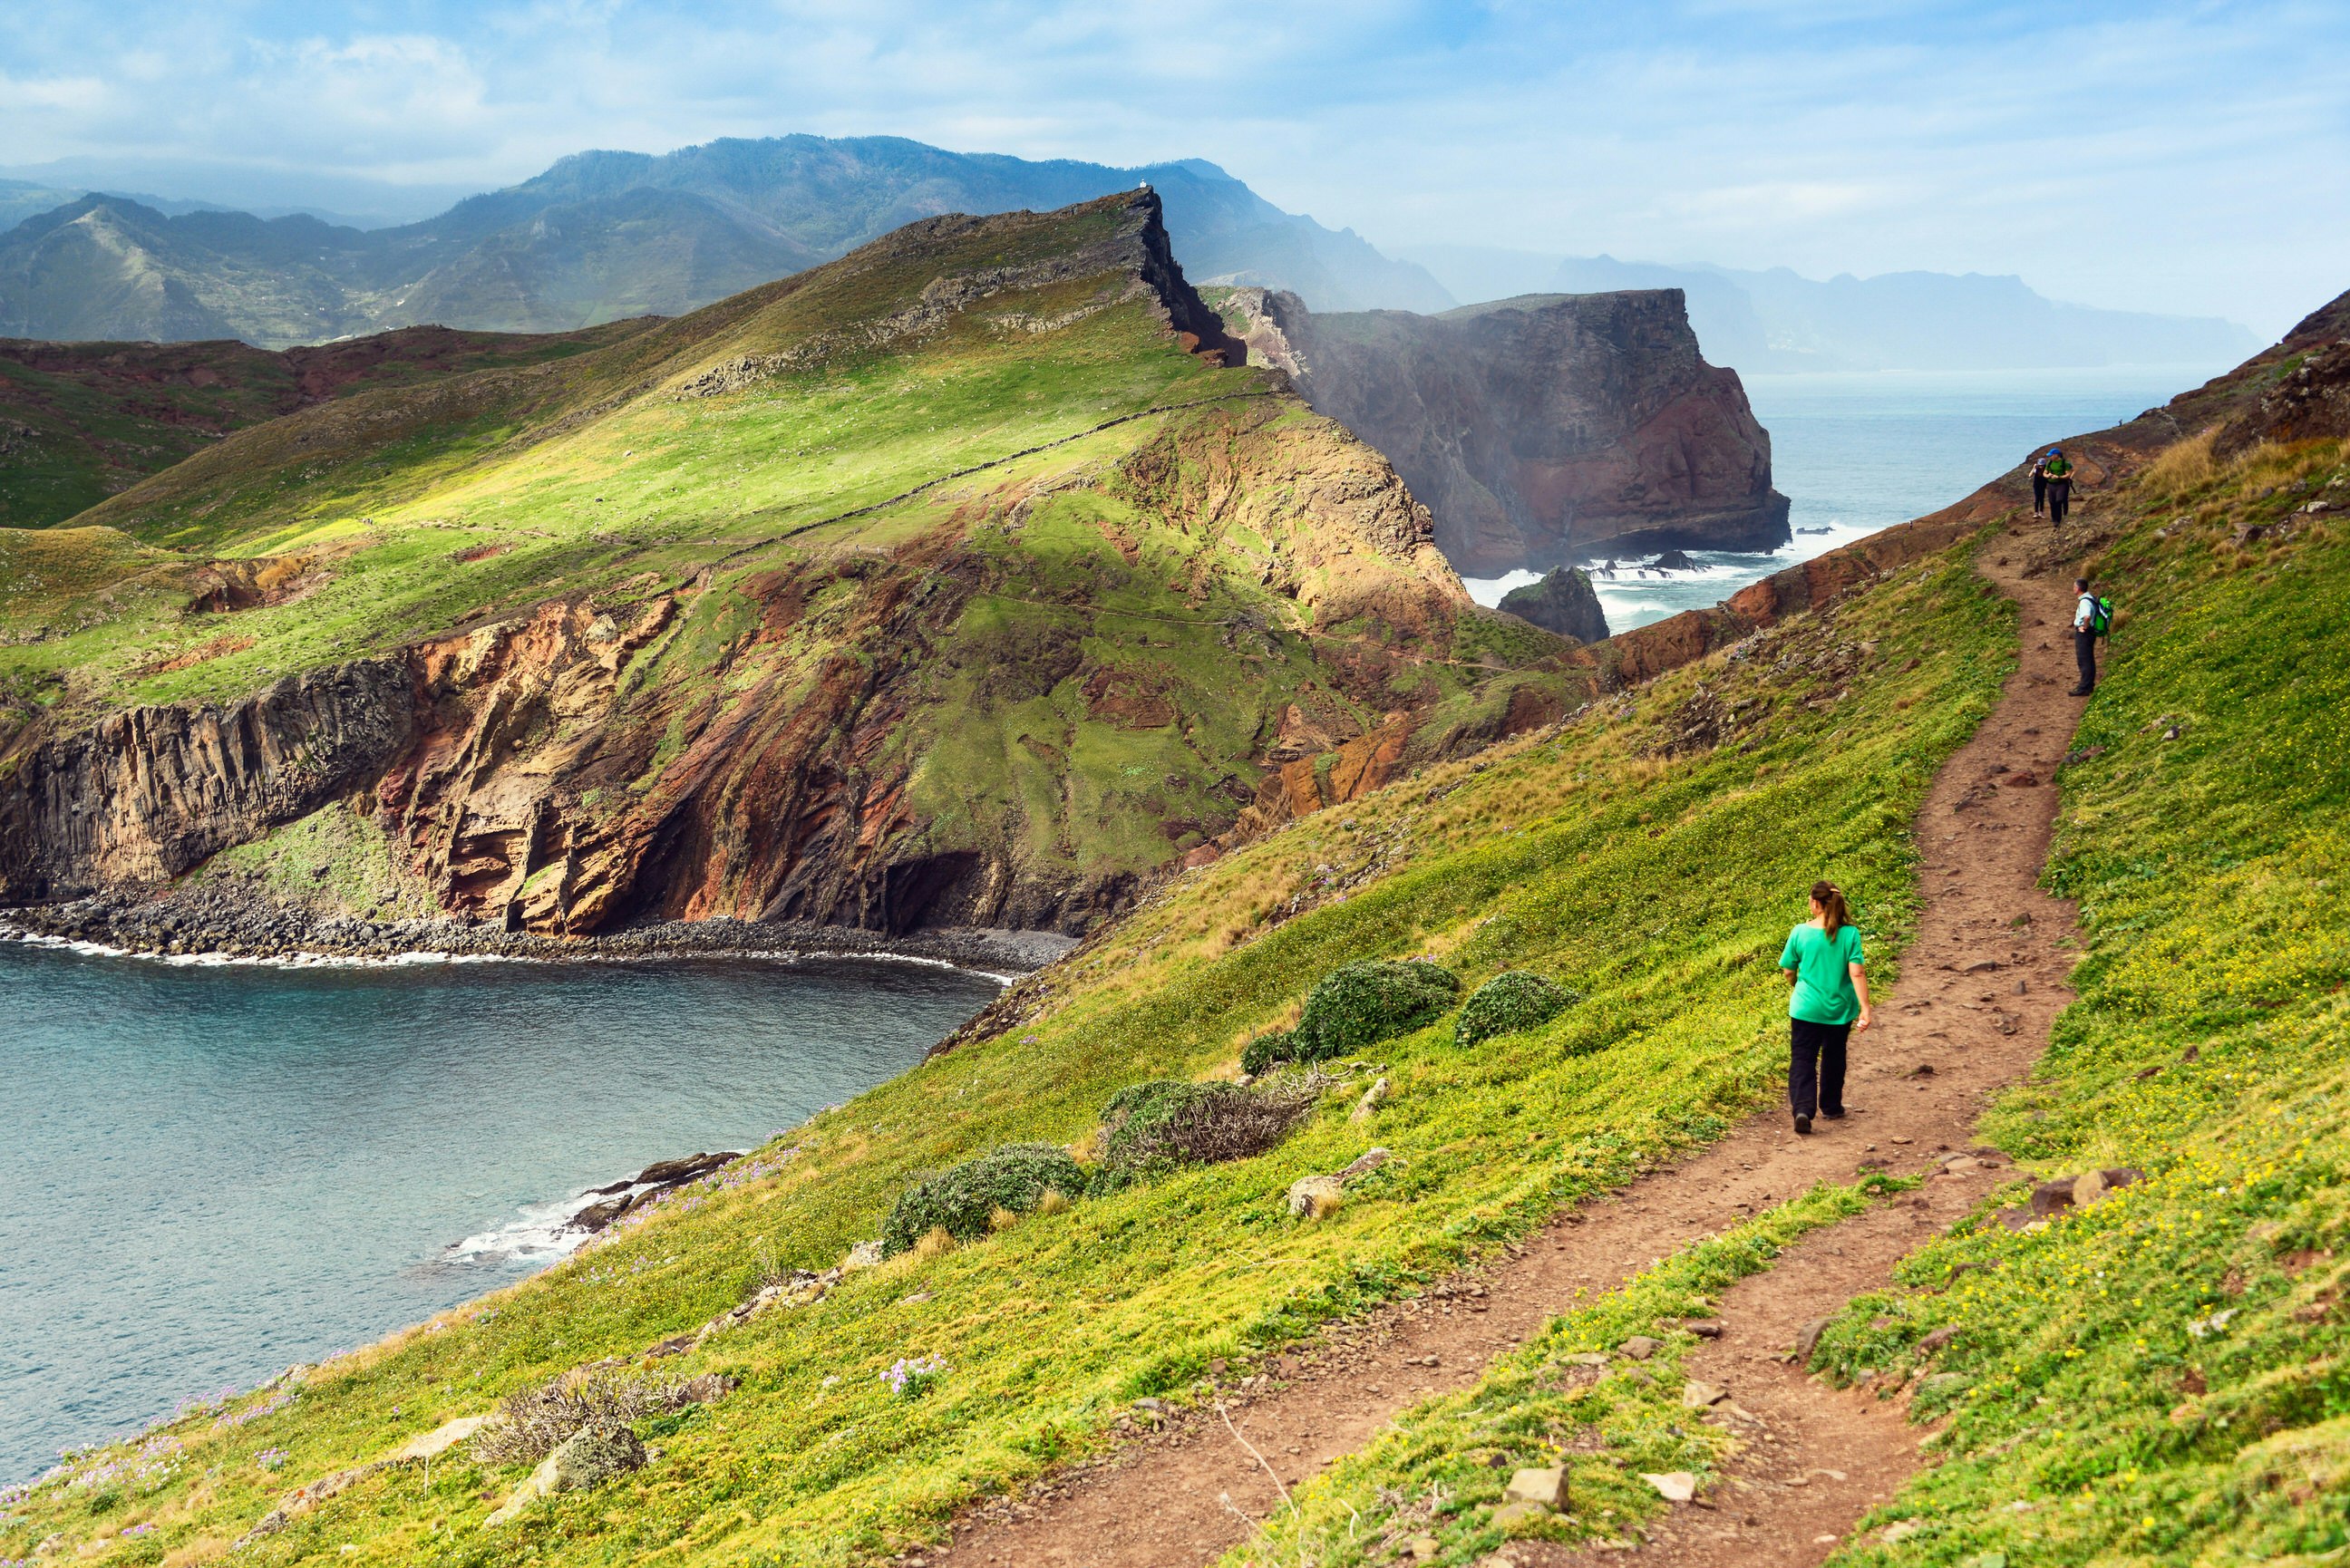 Three hikers walk along a grassy coastal trail. One is looking down towards the sea, and there are rugged mountains in the distance.